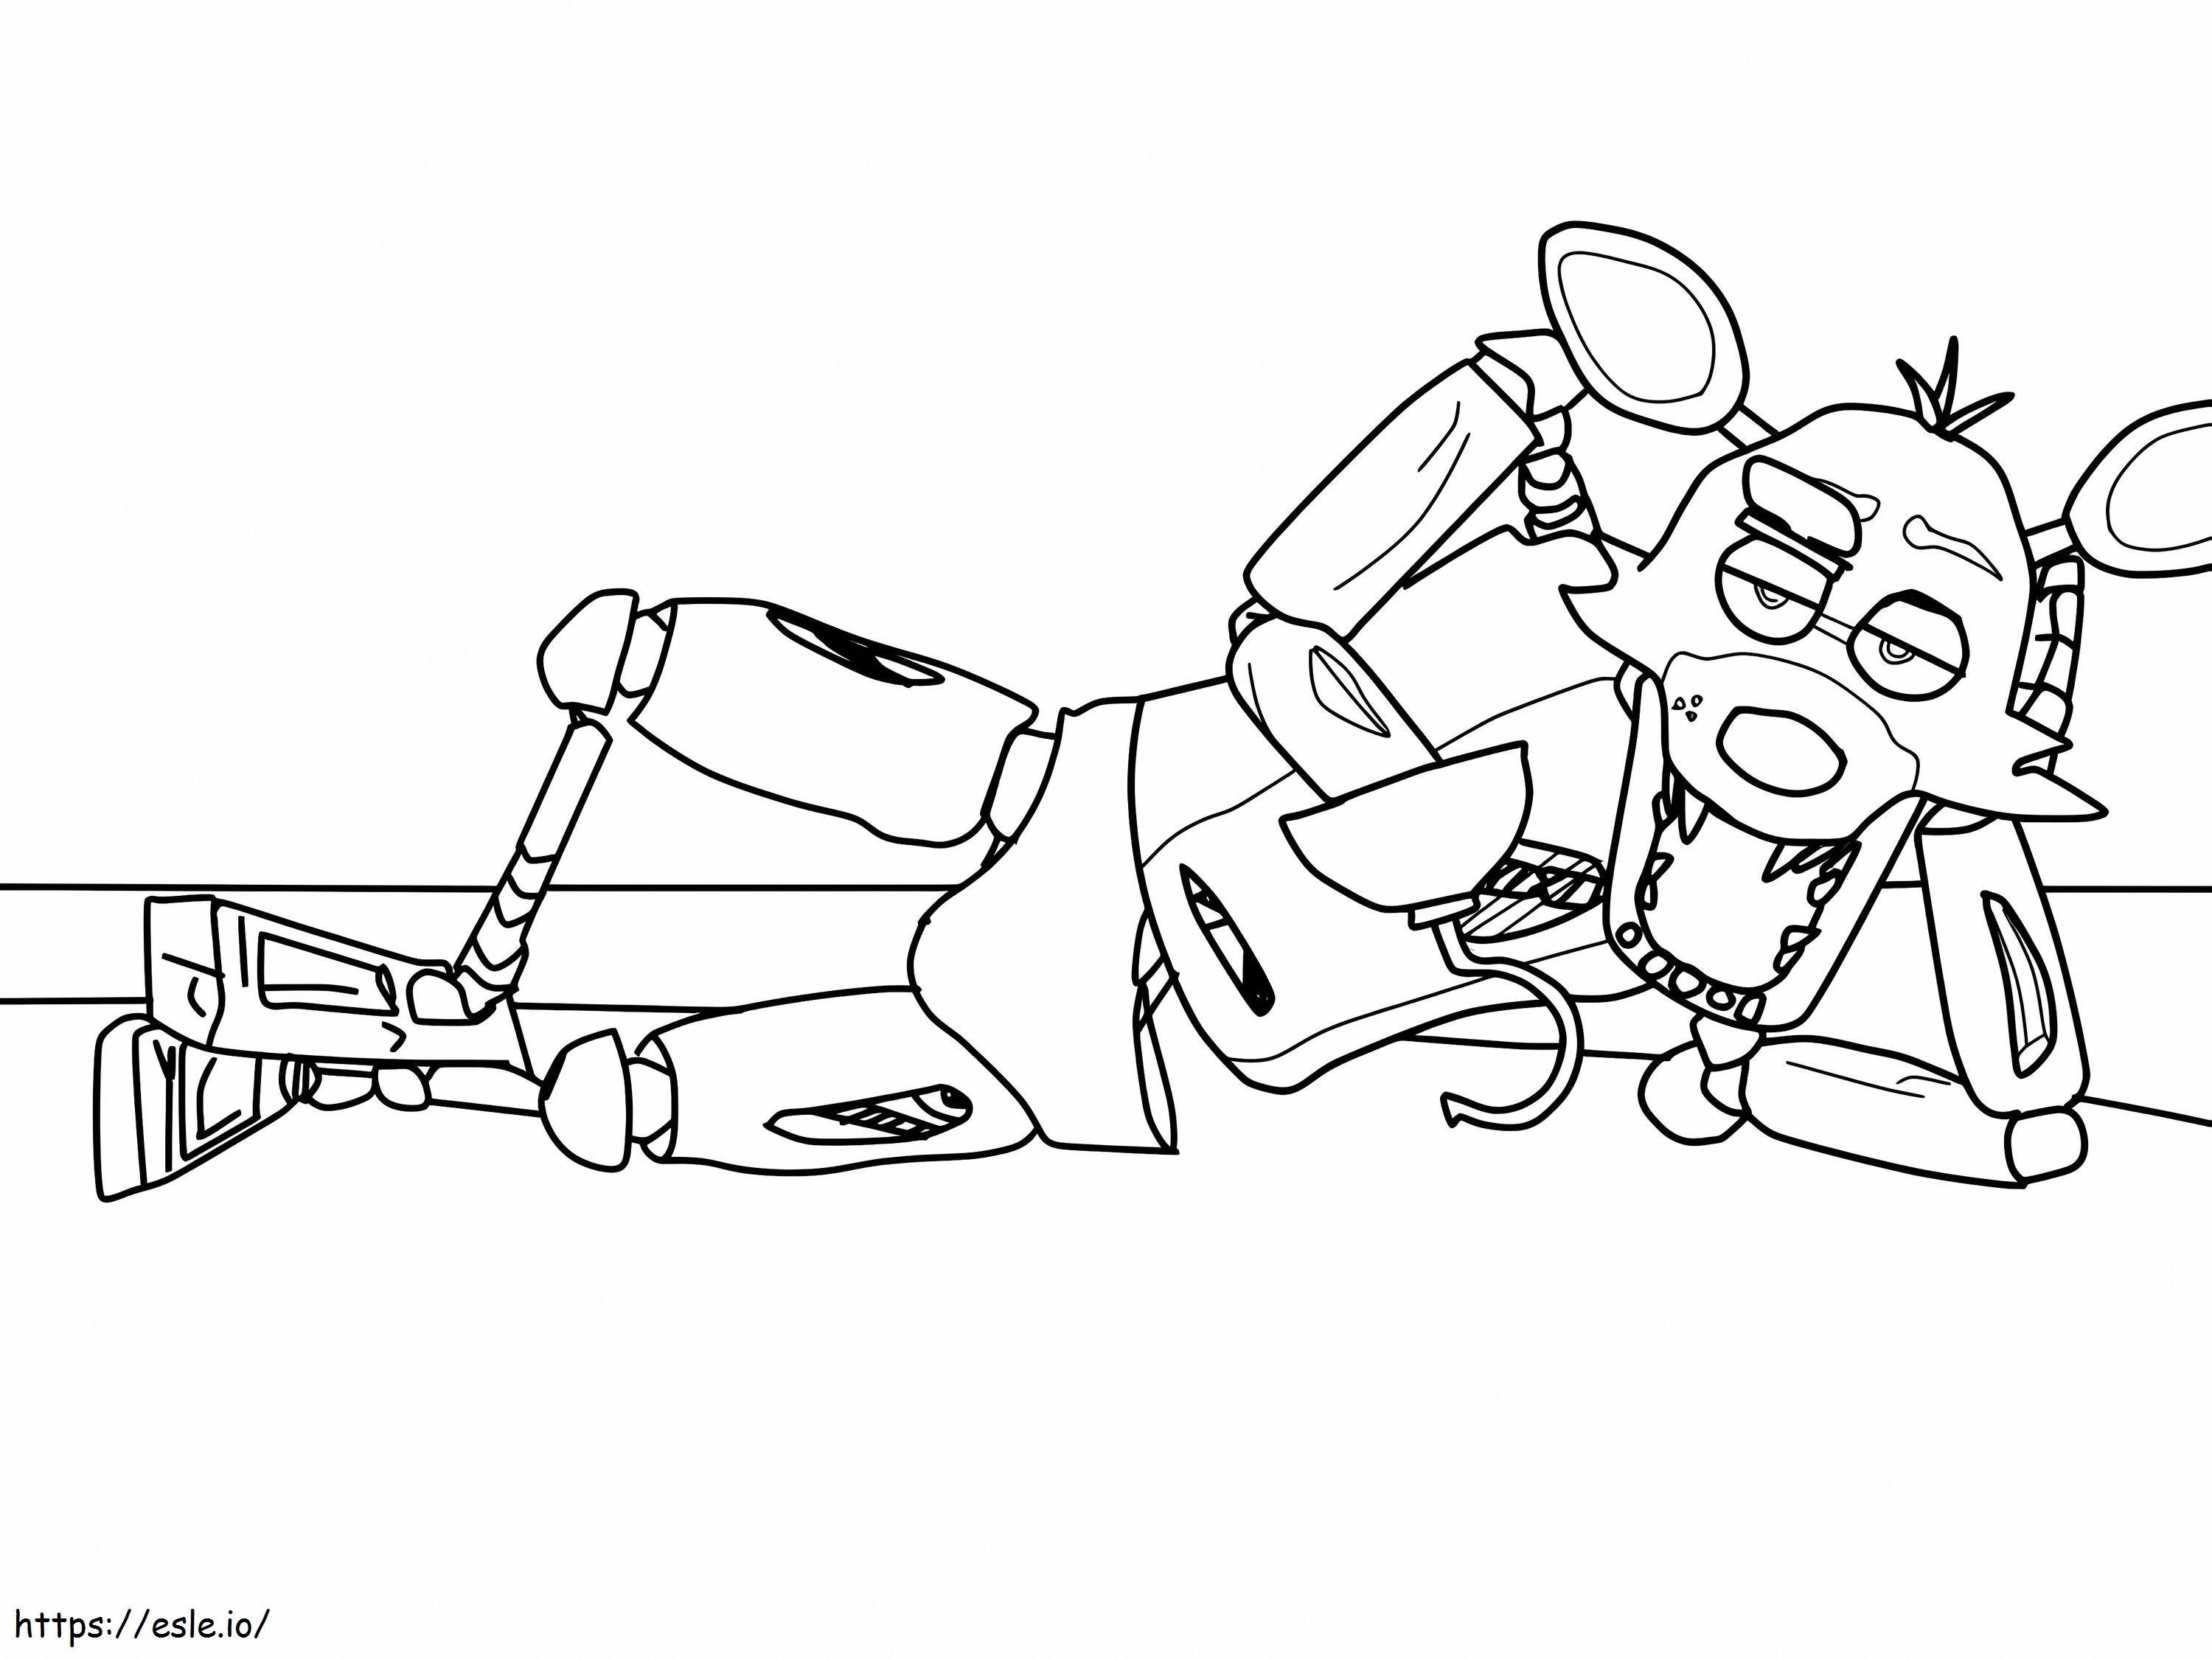 Funny FNAF Foxy coloring page